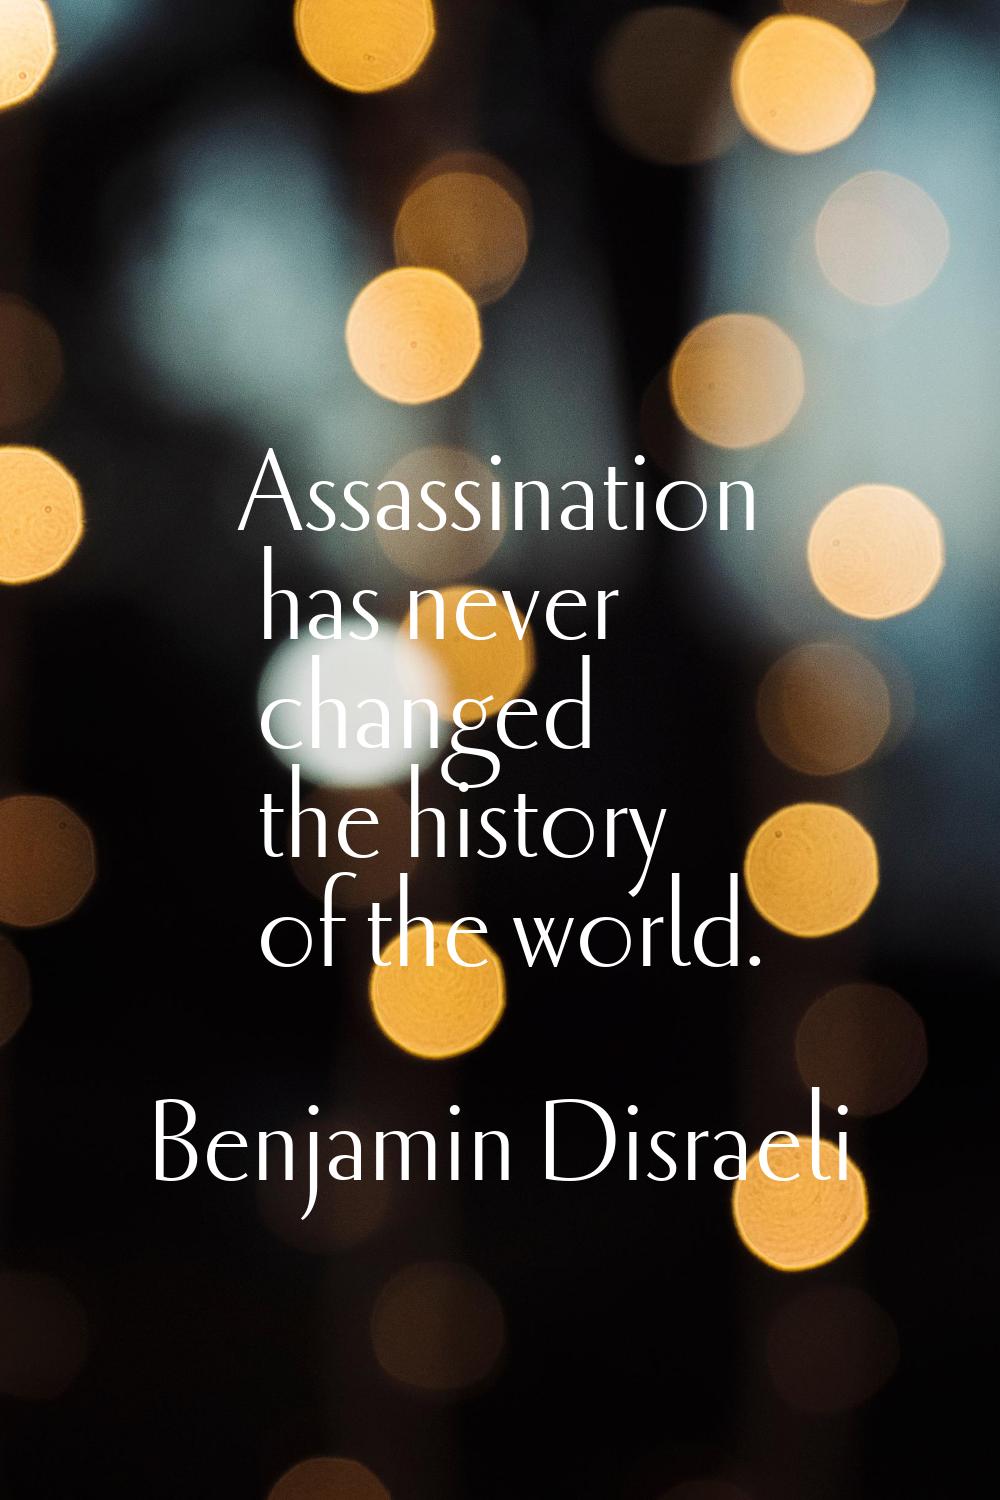 Assassination has never changed the history of the world.